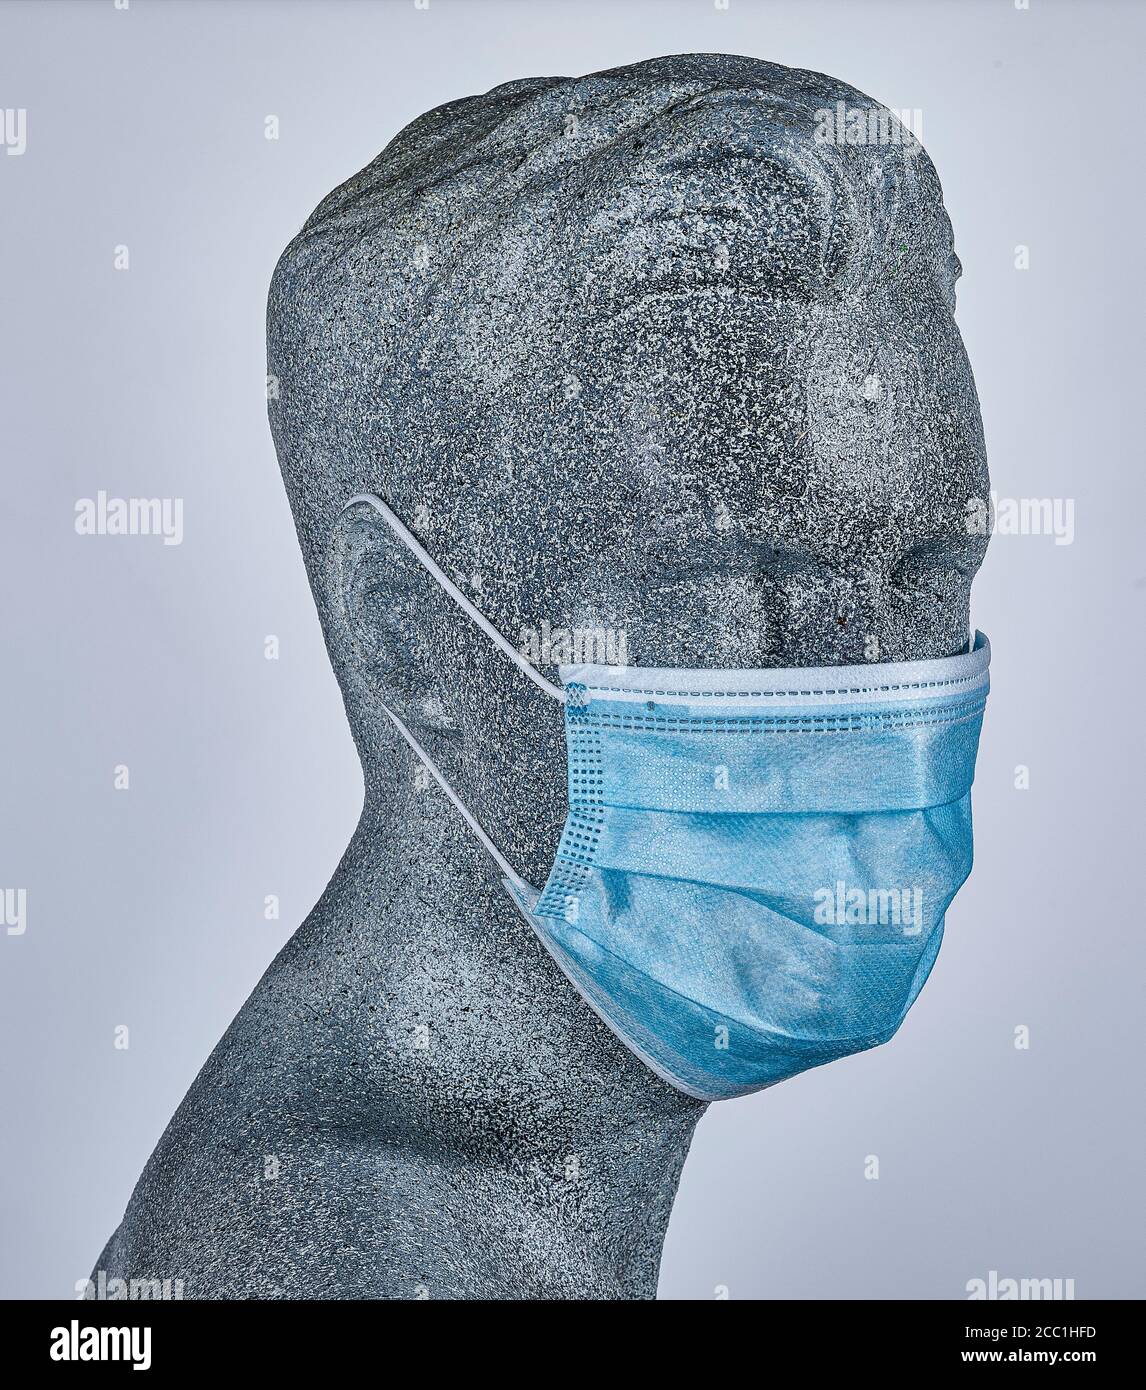 Male display dummy, wearing a protective medical face mask, on grey background Stock Photo